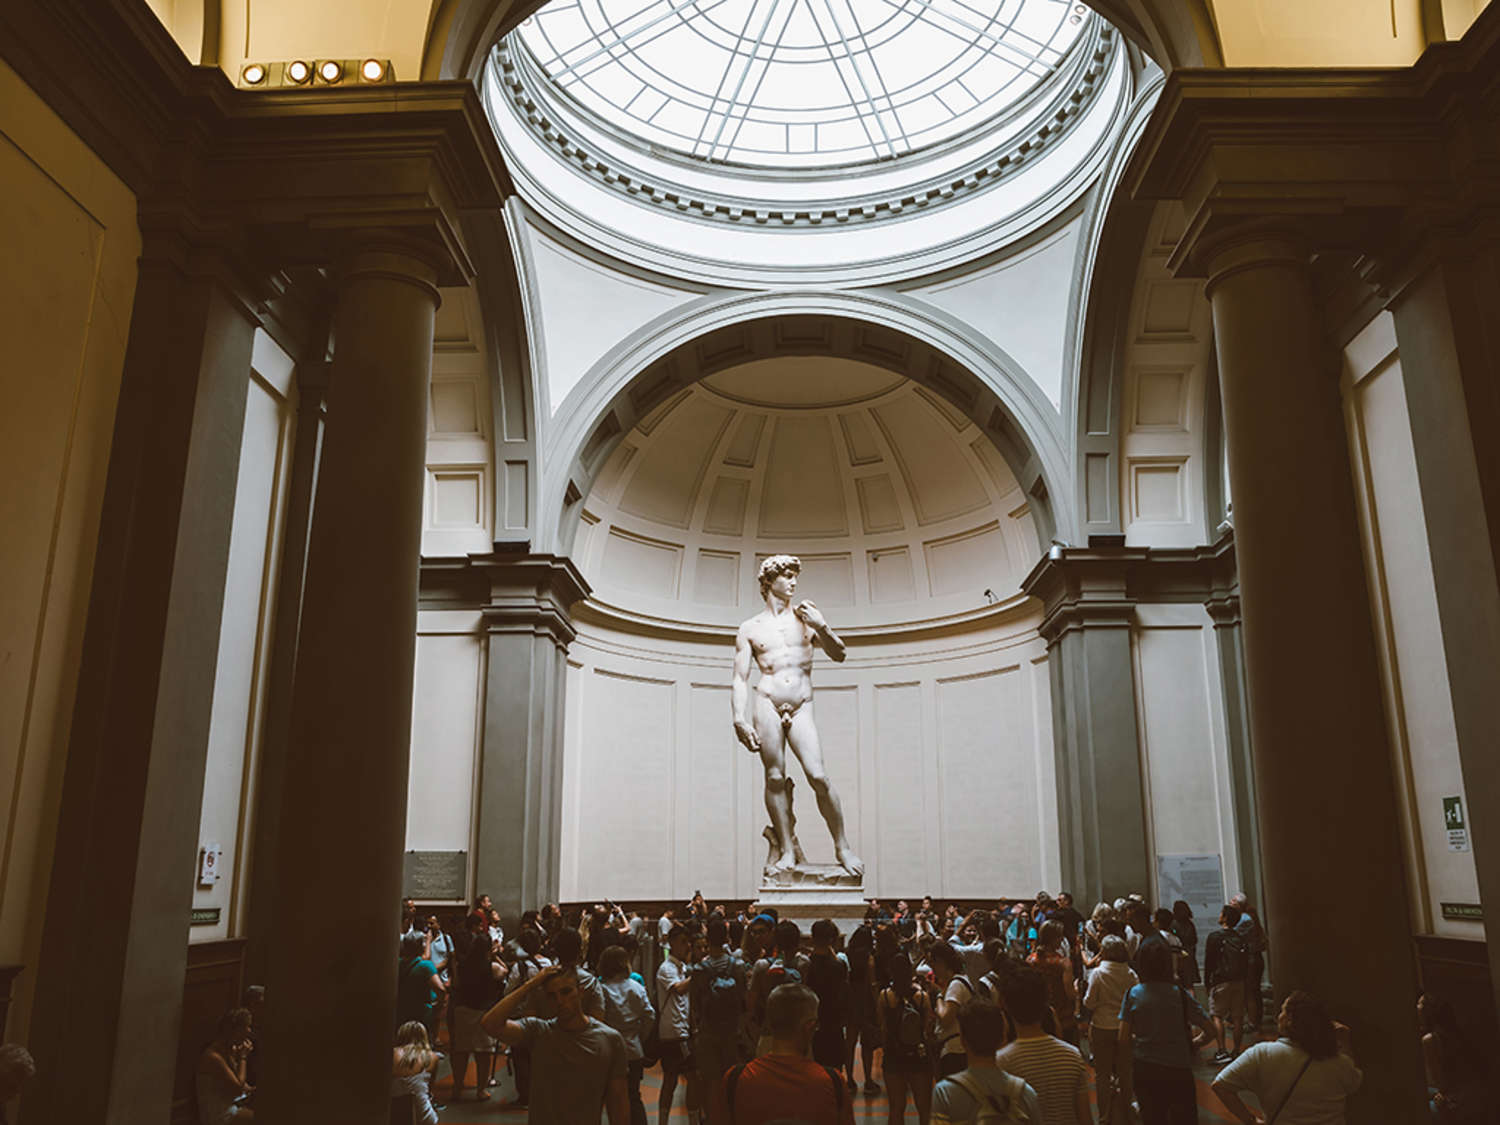 Ten Facts about the Statue of David - Context Travel